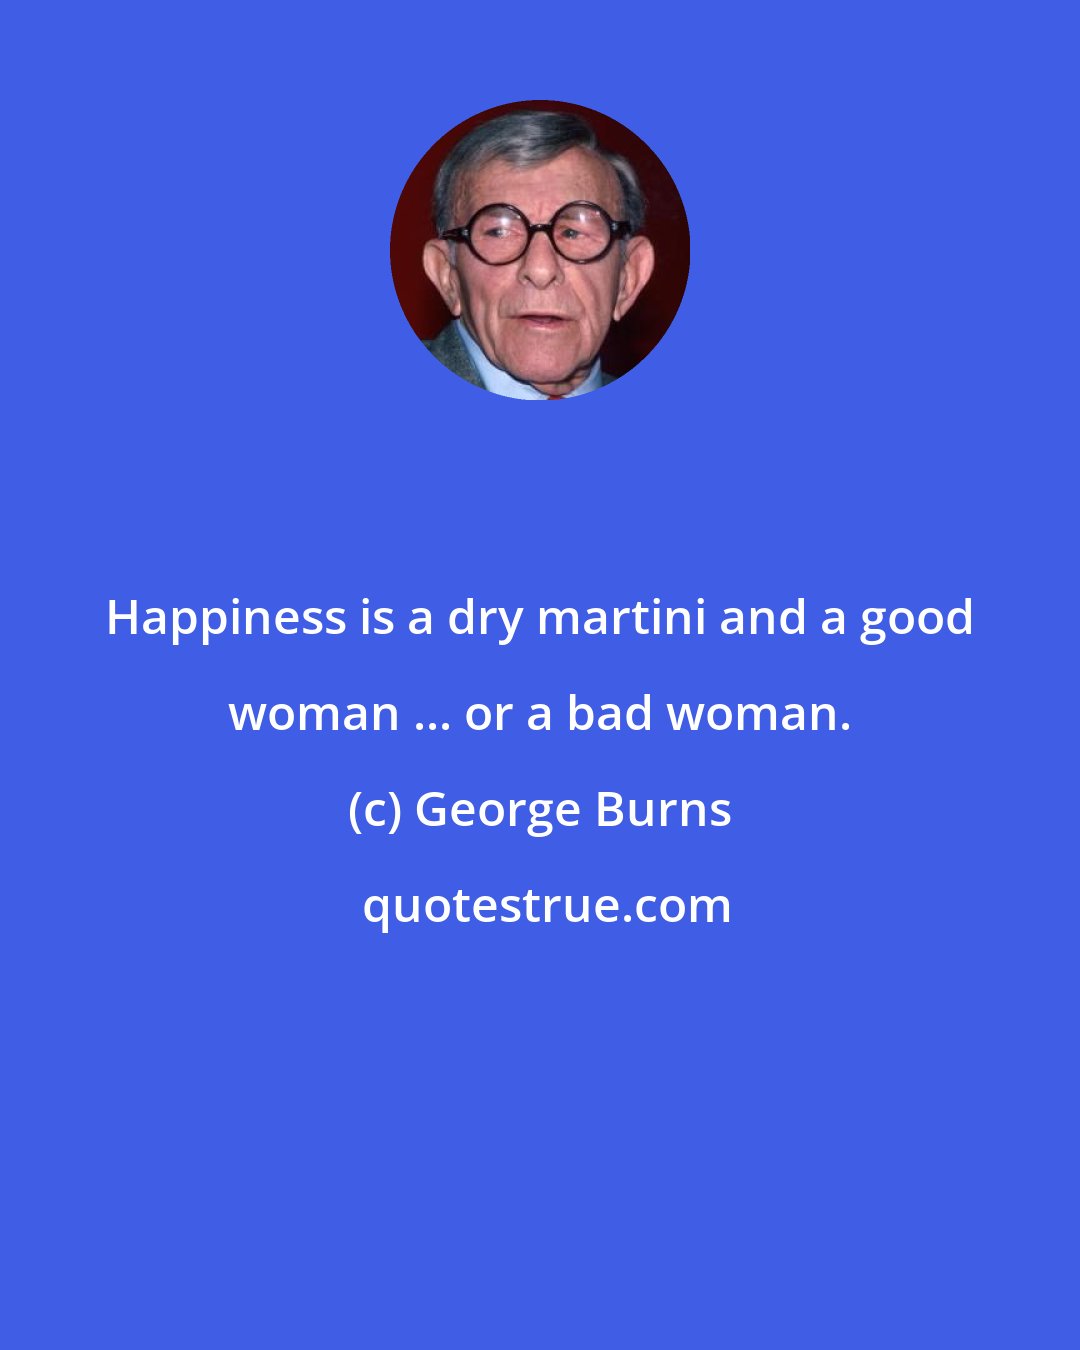 George Burns: Happiness is a dry martini and a good woman ... or a bad woman.